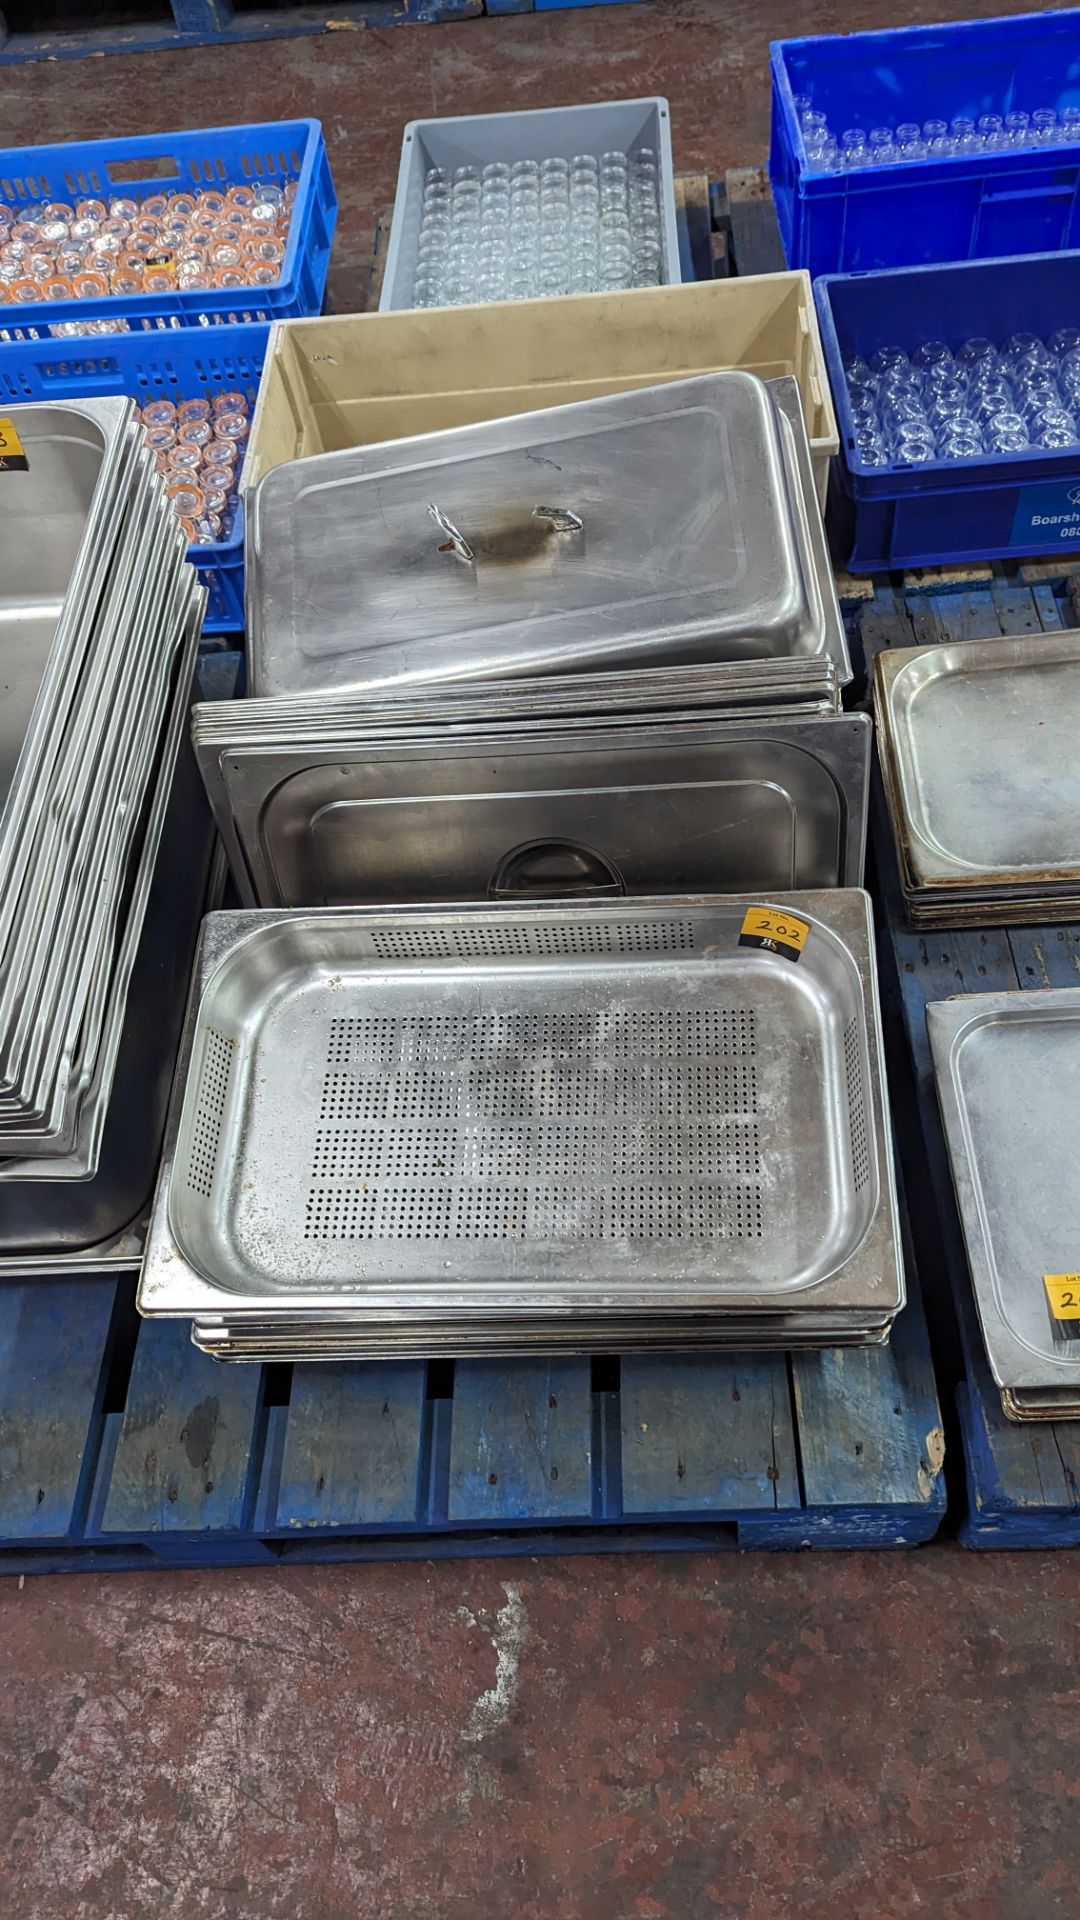 Row of assorted stainless steel trays including perforated & lids for use with same - approximately